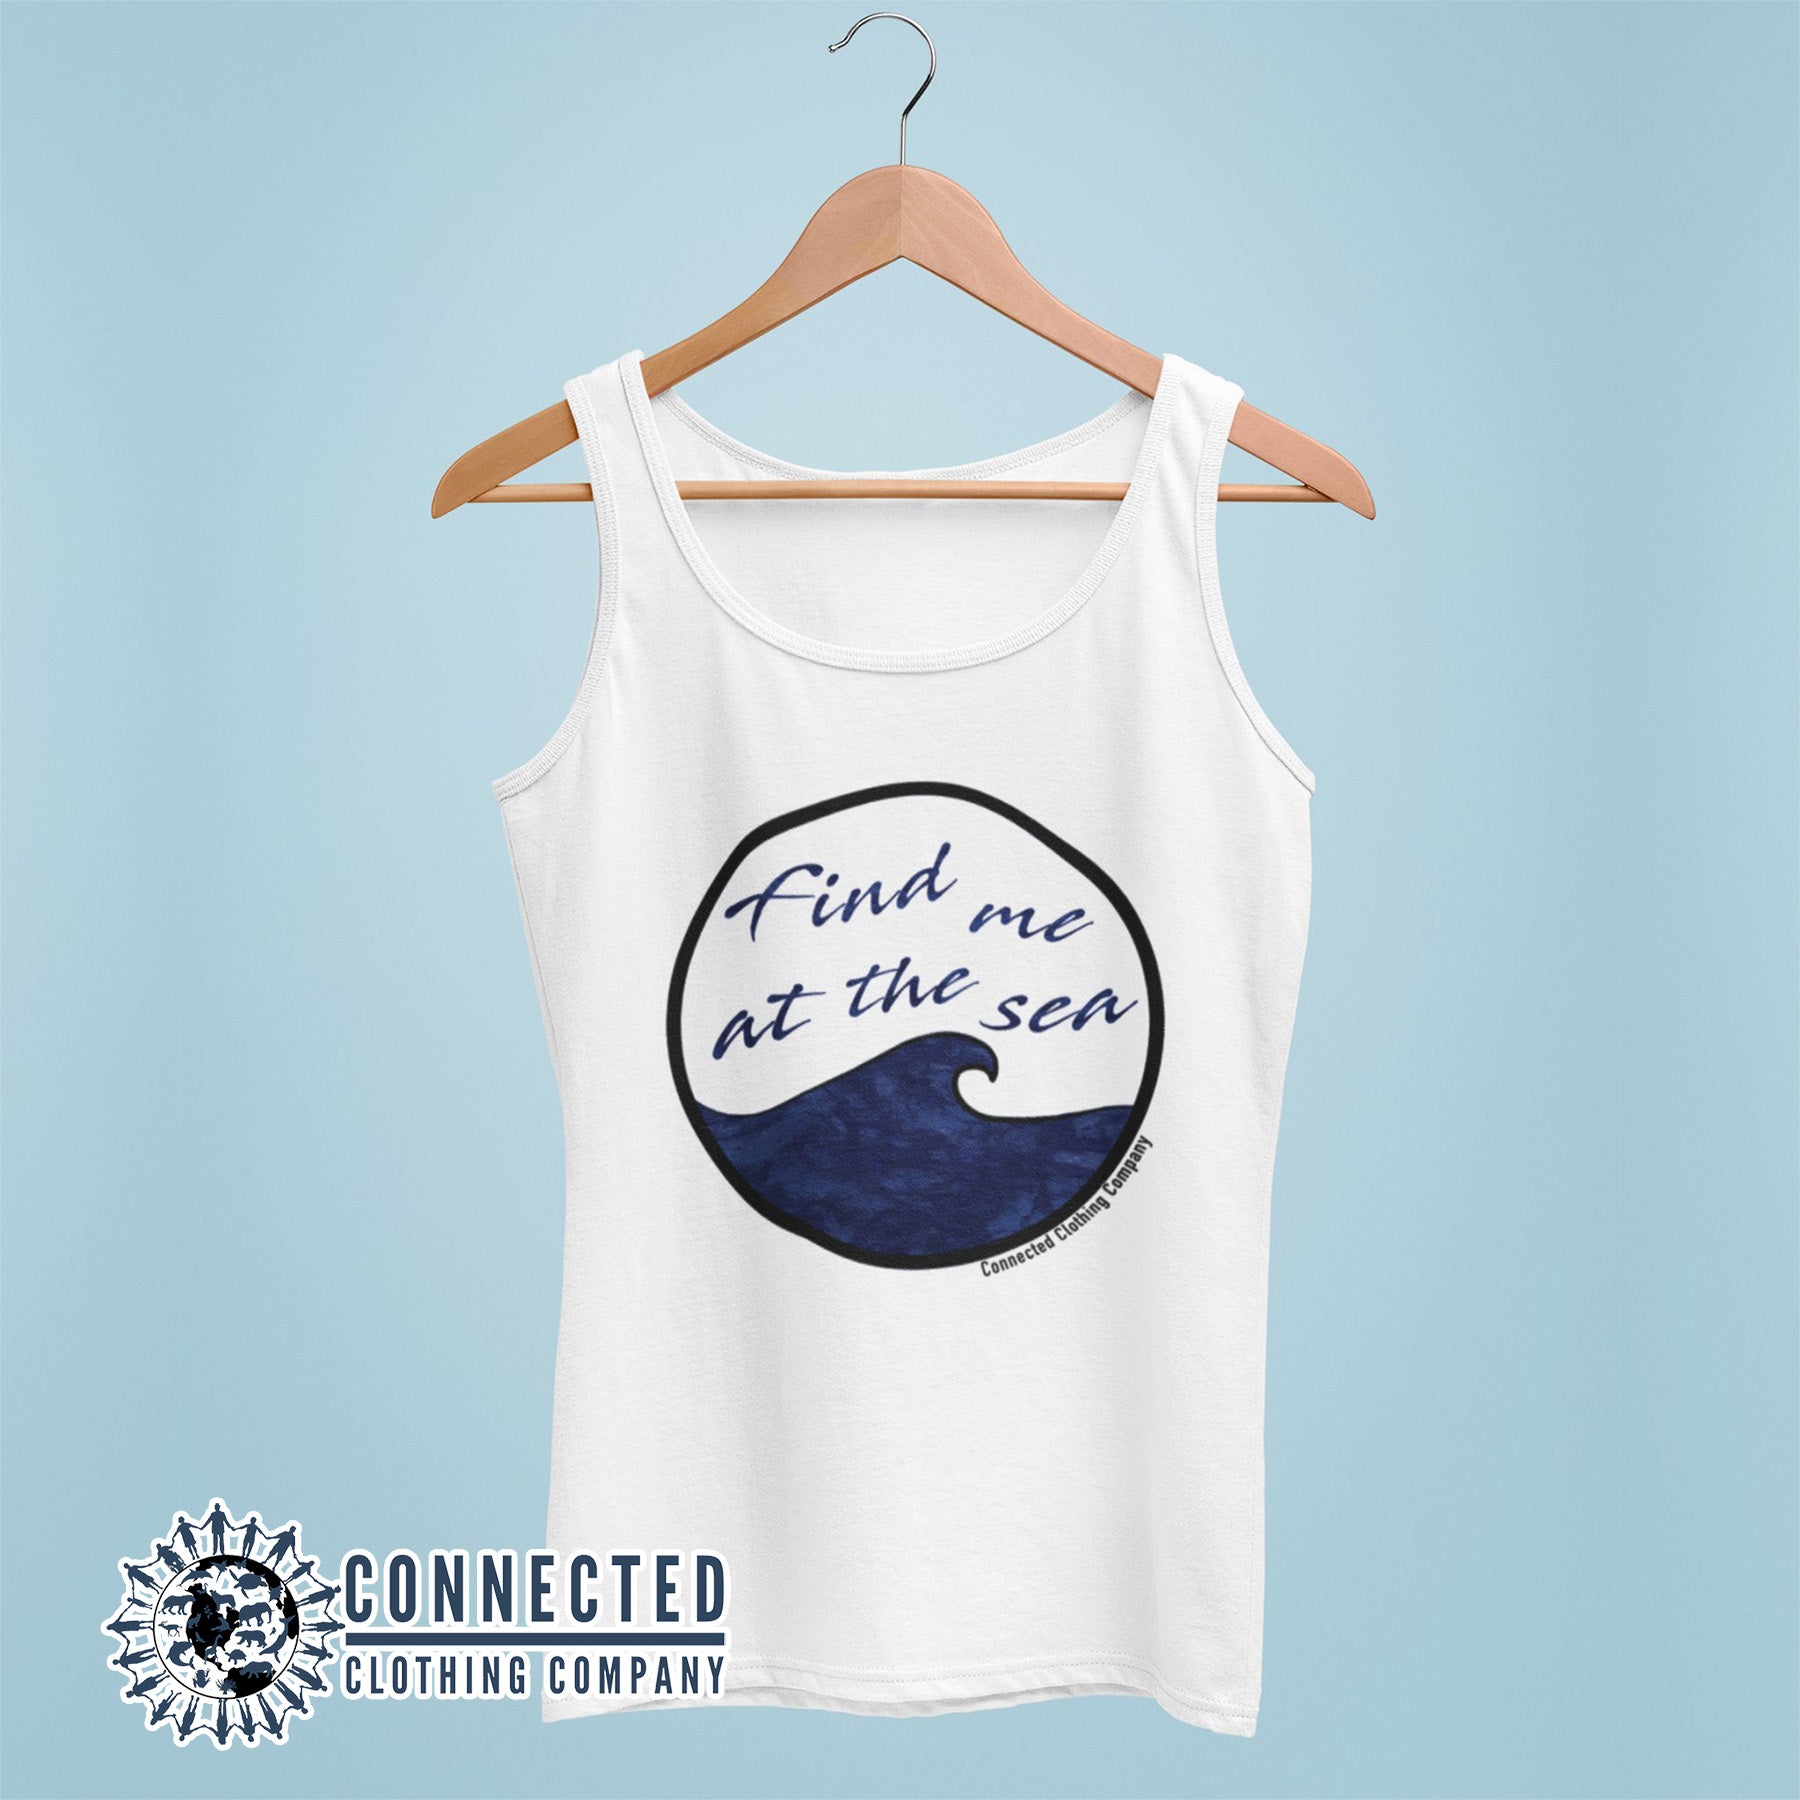 White Find Me At The Sea Women's Relaxed Tank Top - Connected Clothing Company - 10% of profits donated to Mission Blue ocean conservation